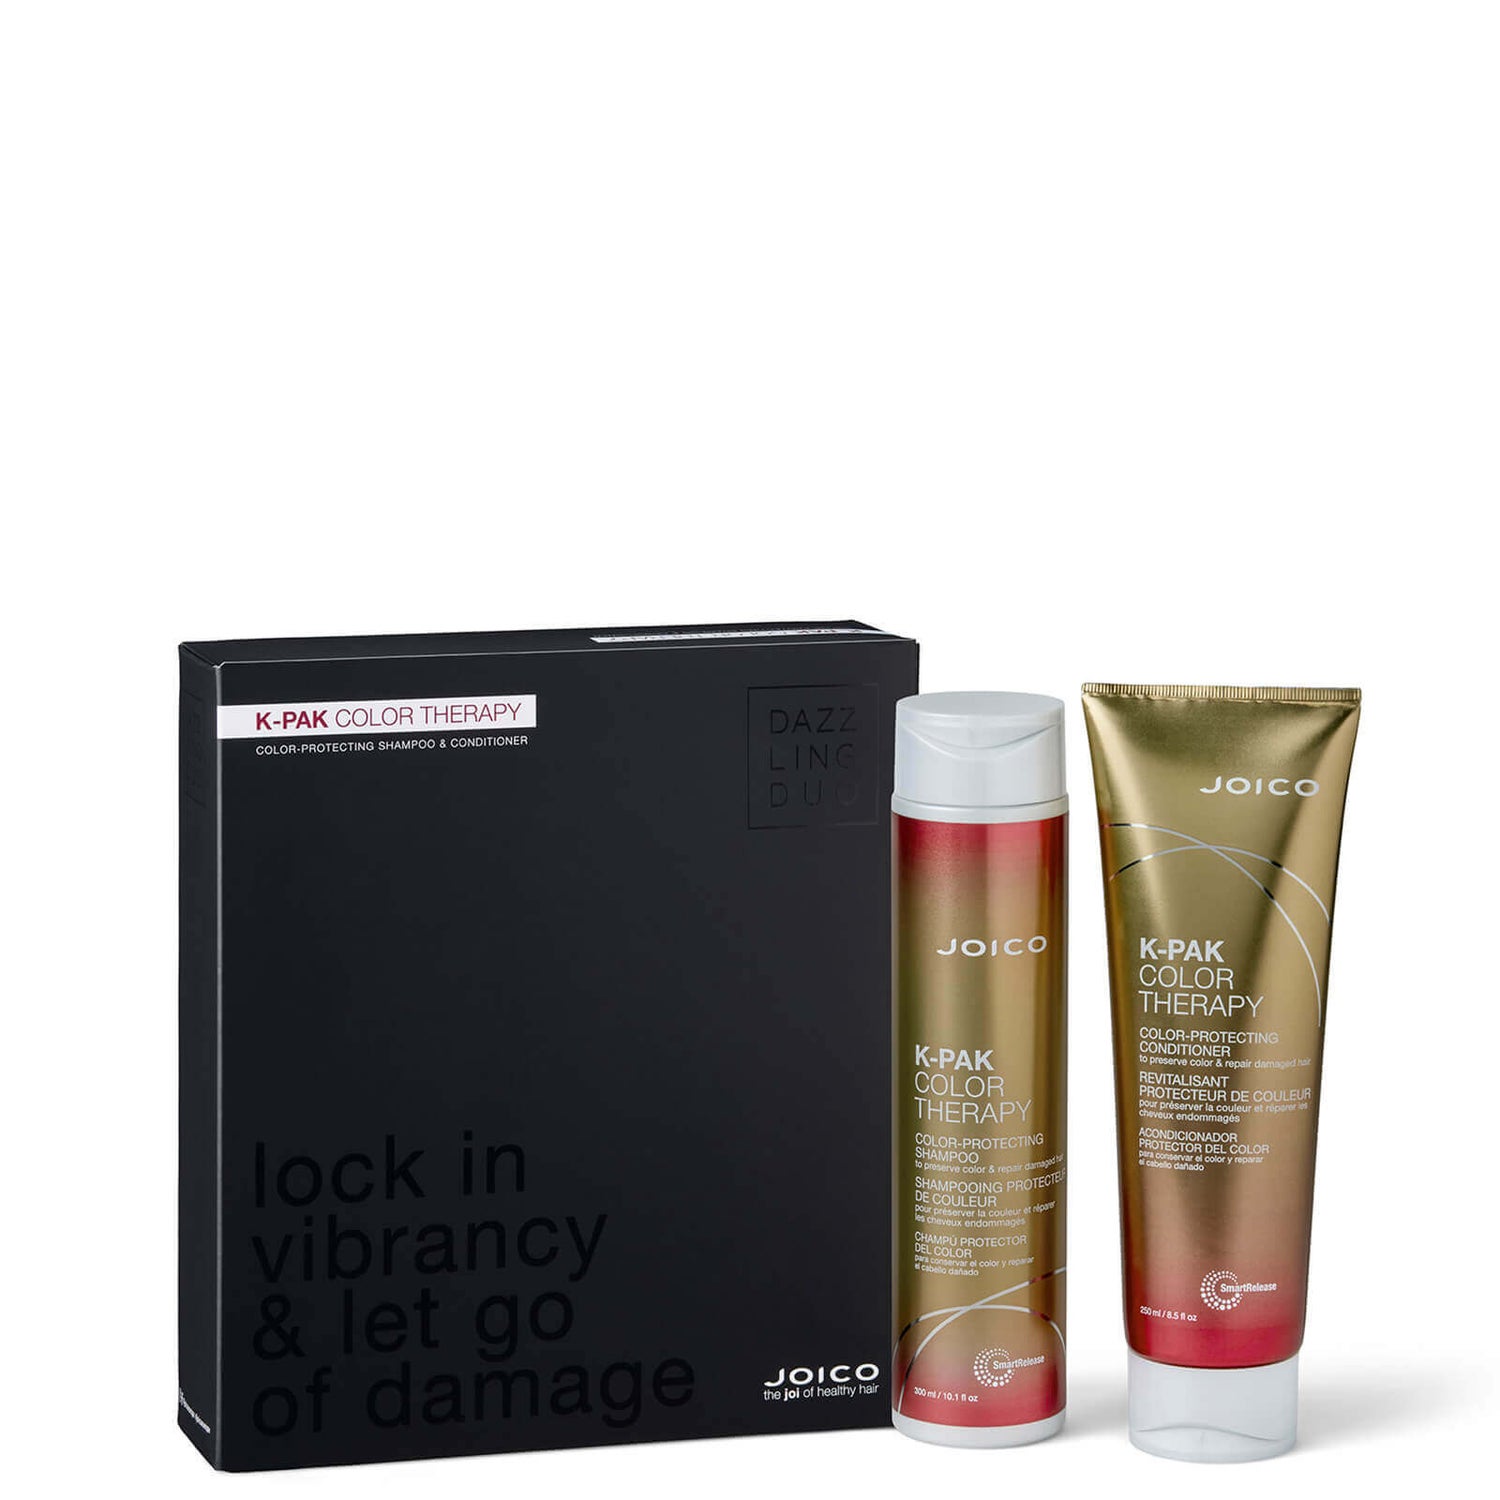 JOICO K-Pak Color Therapy Shampoo and Balsamo Dazzling Duo